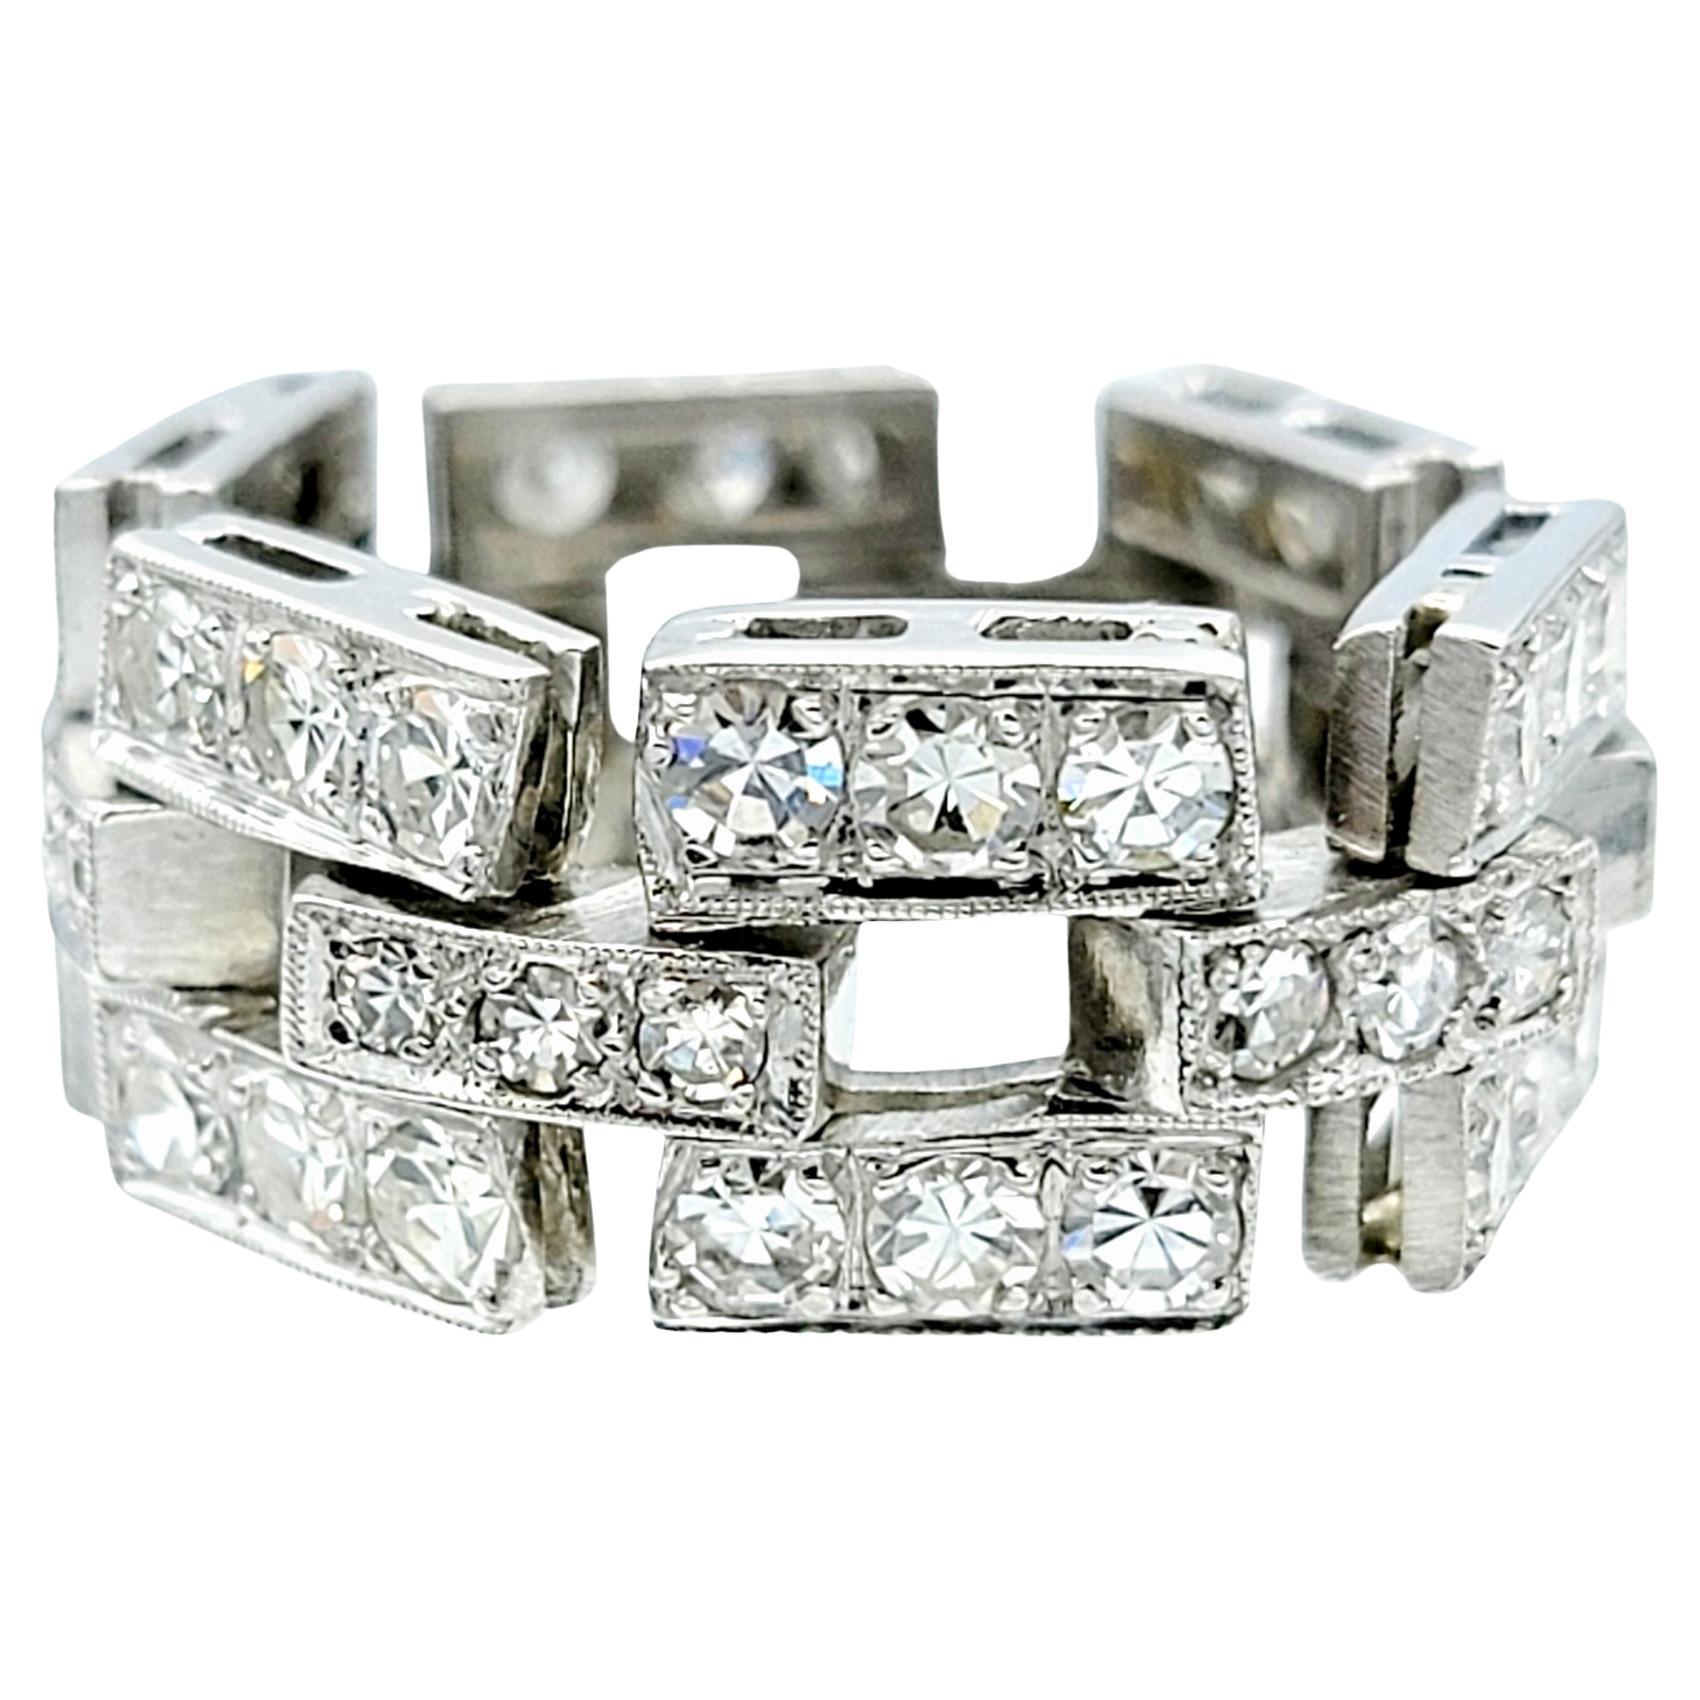 Flexible Link 1.60 Carat Pave Diamond Band Ring in Platinum with Milgrain Detail For Sale